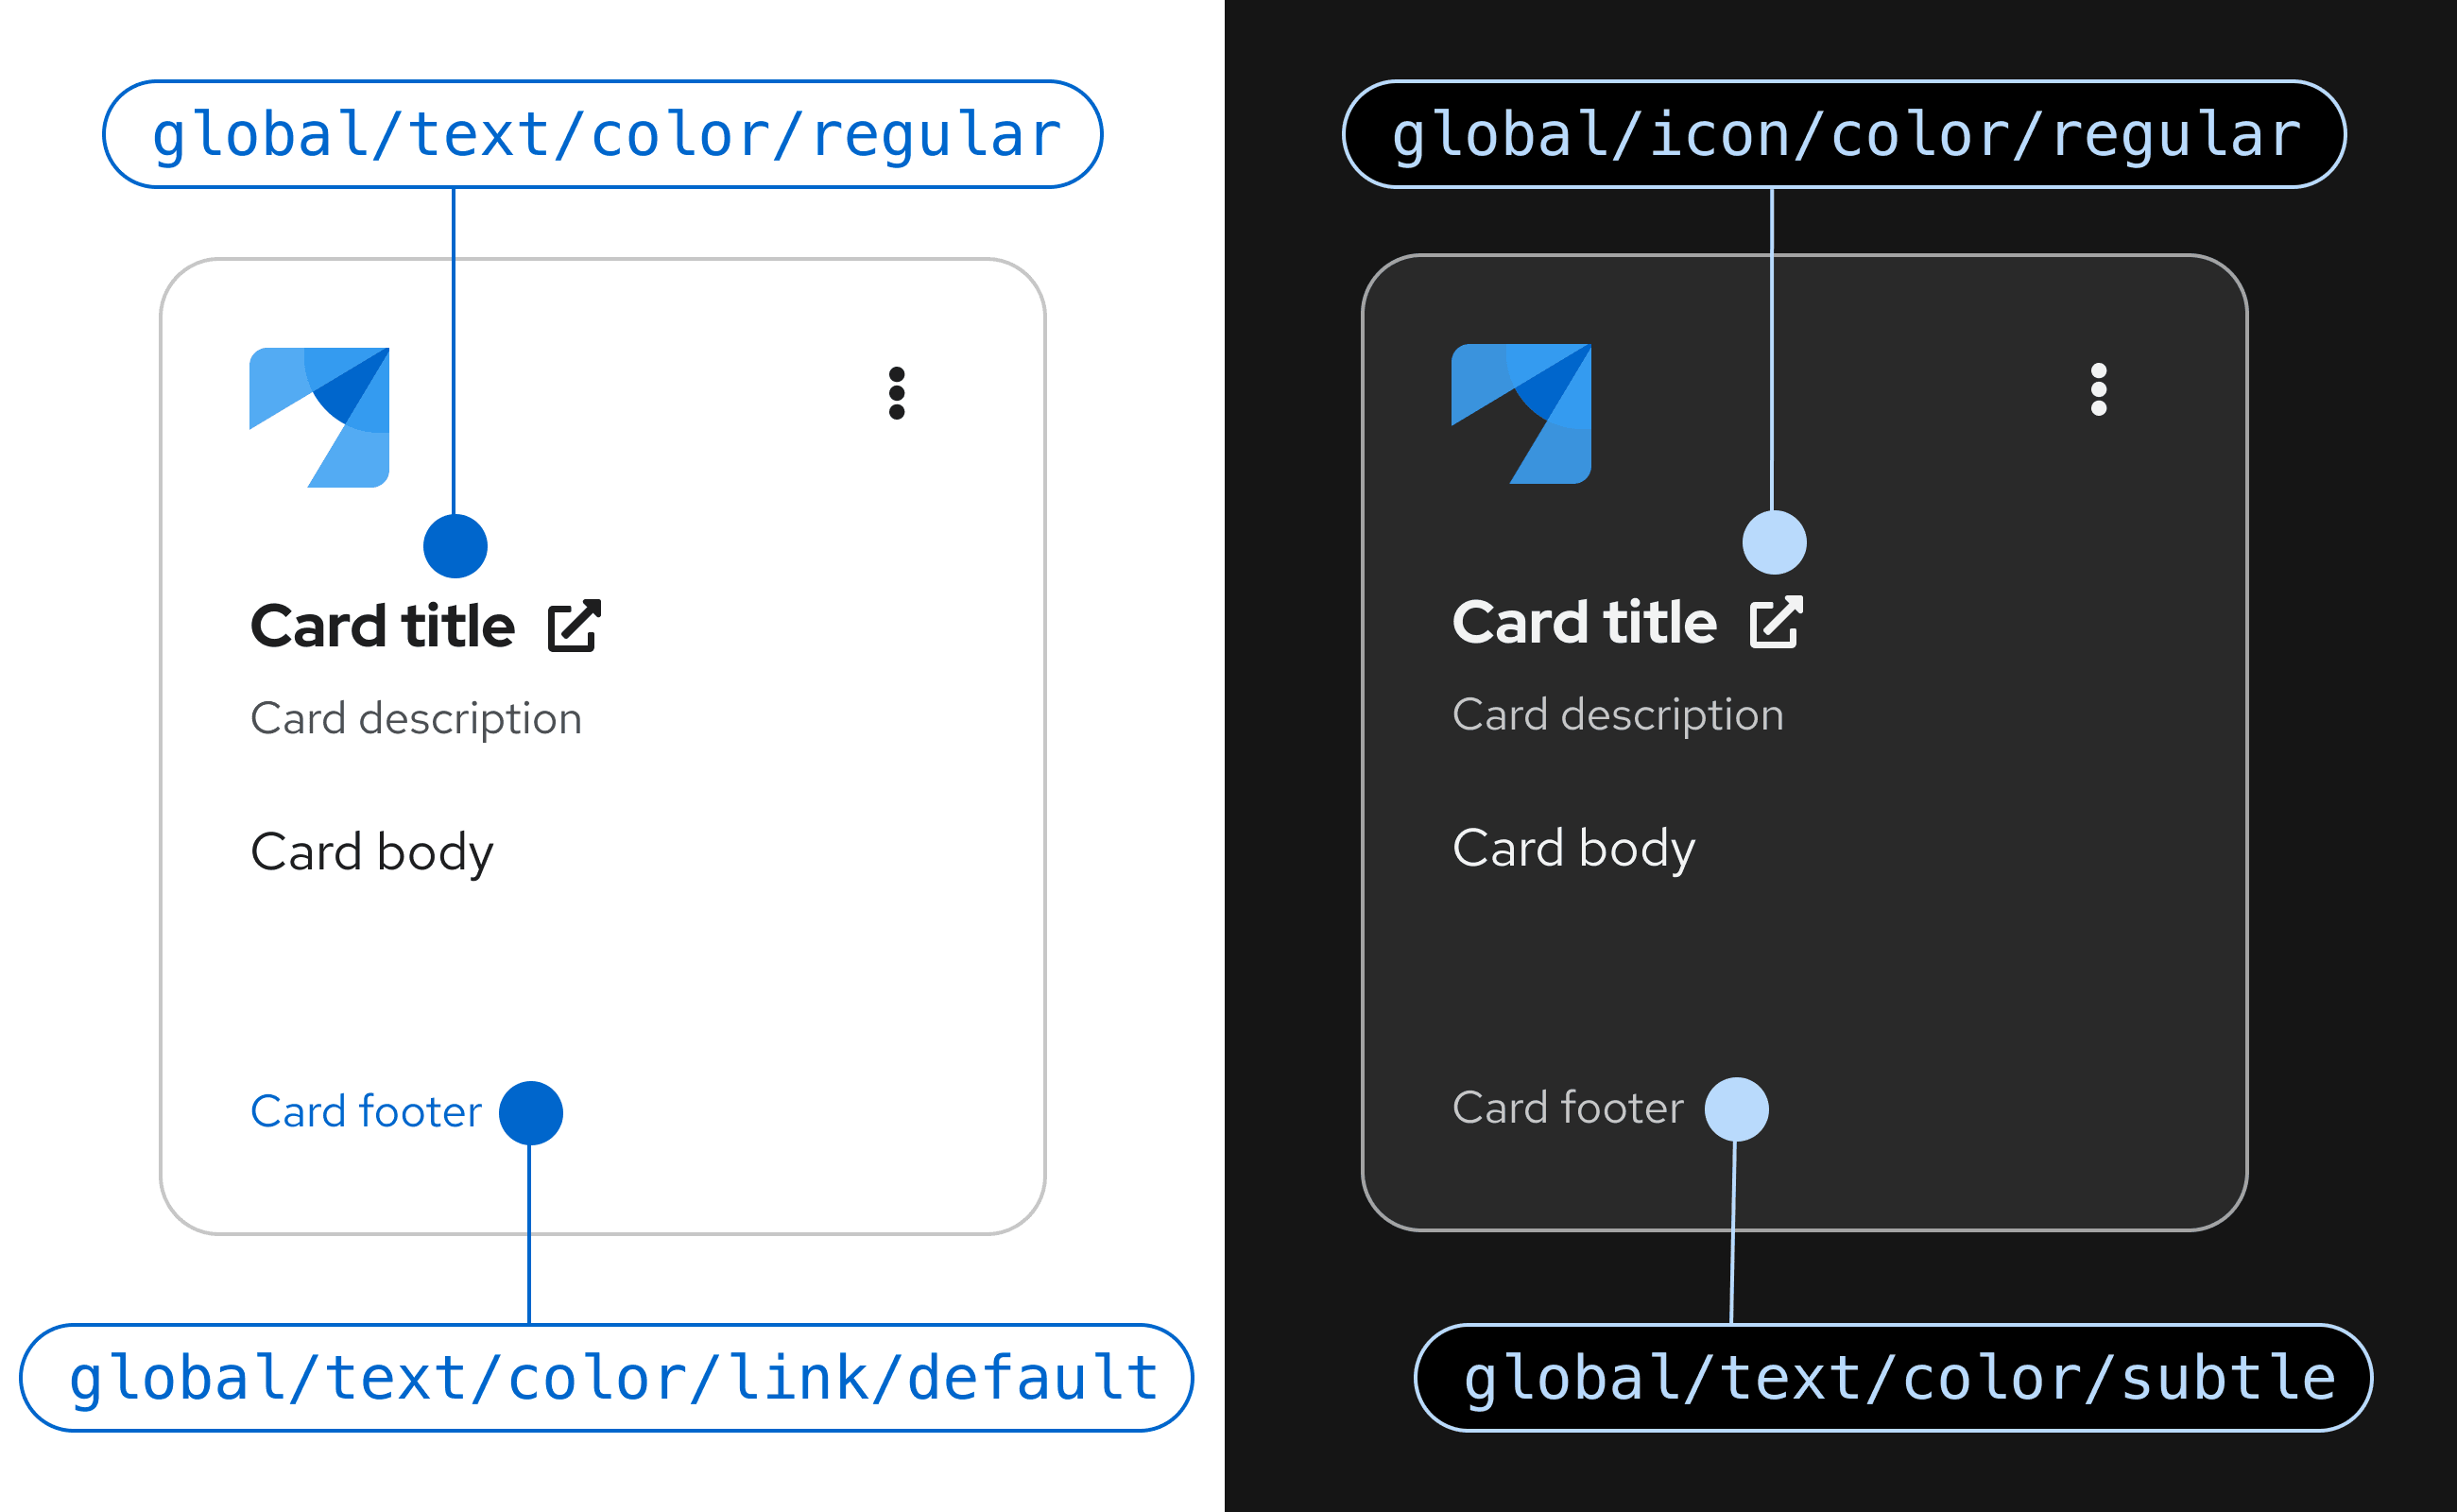 PatternFly text and icon colors